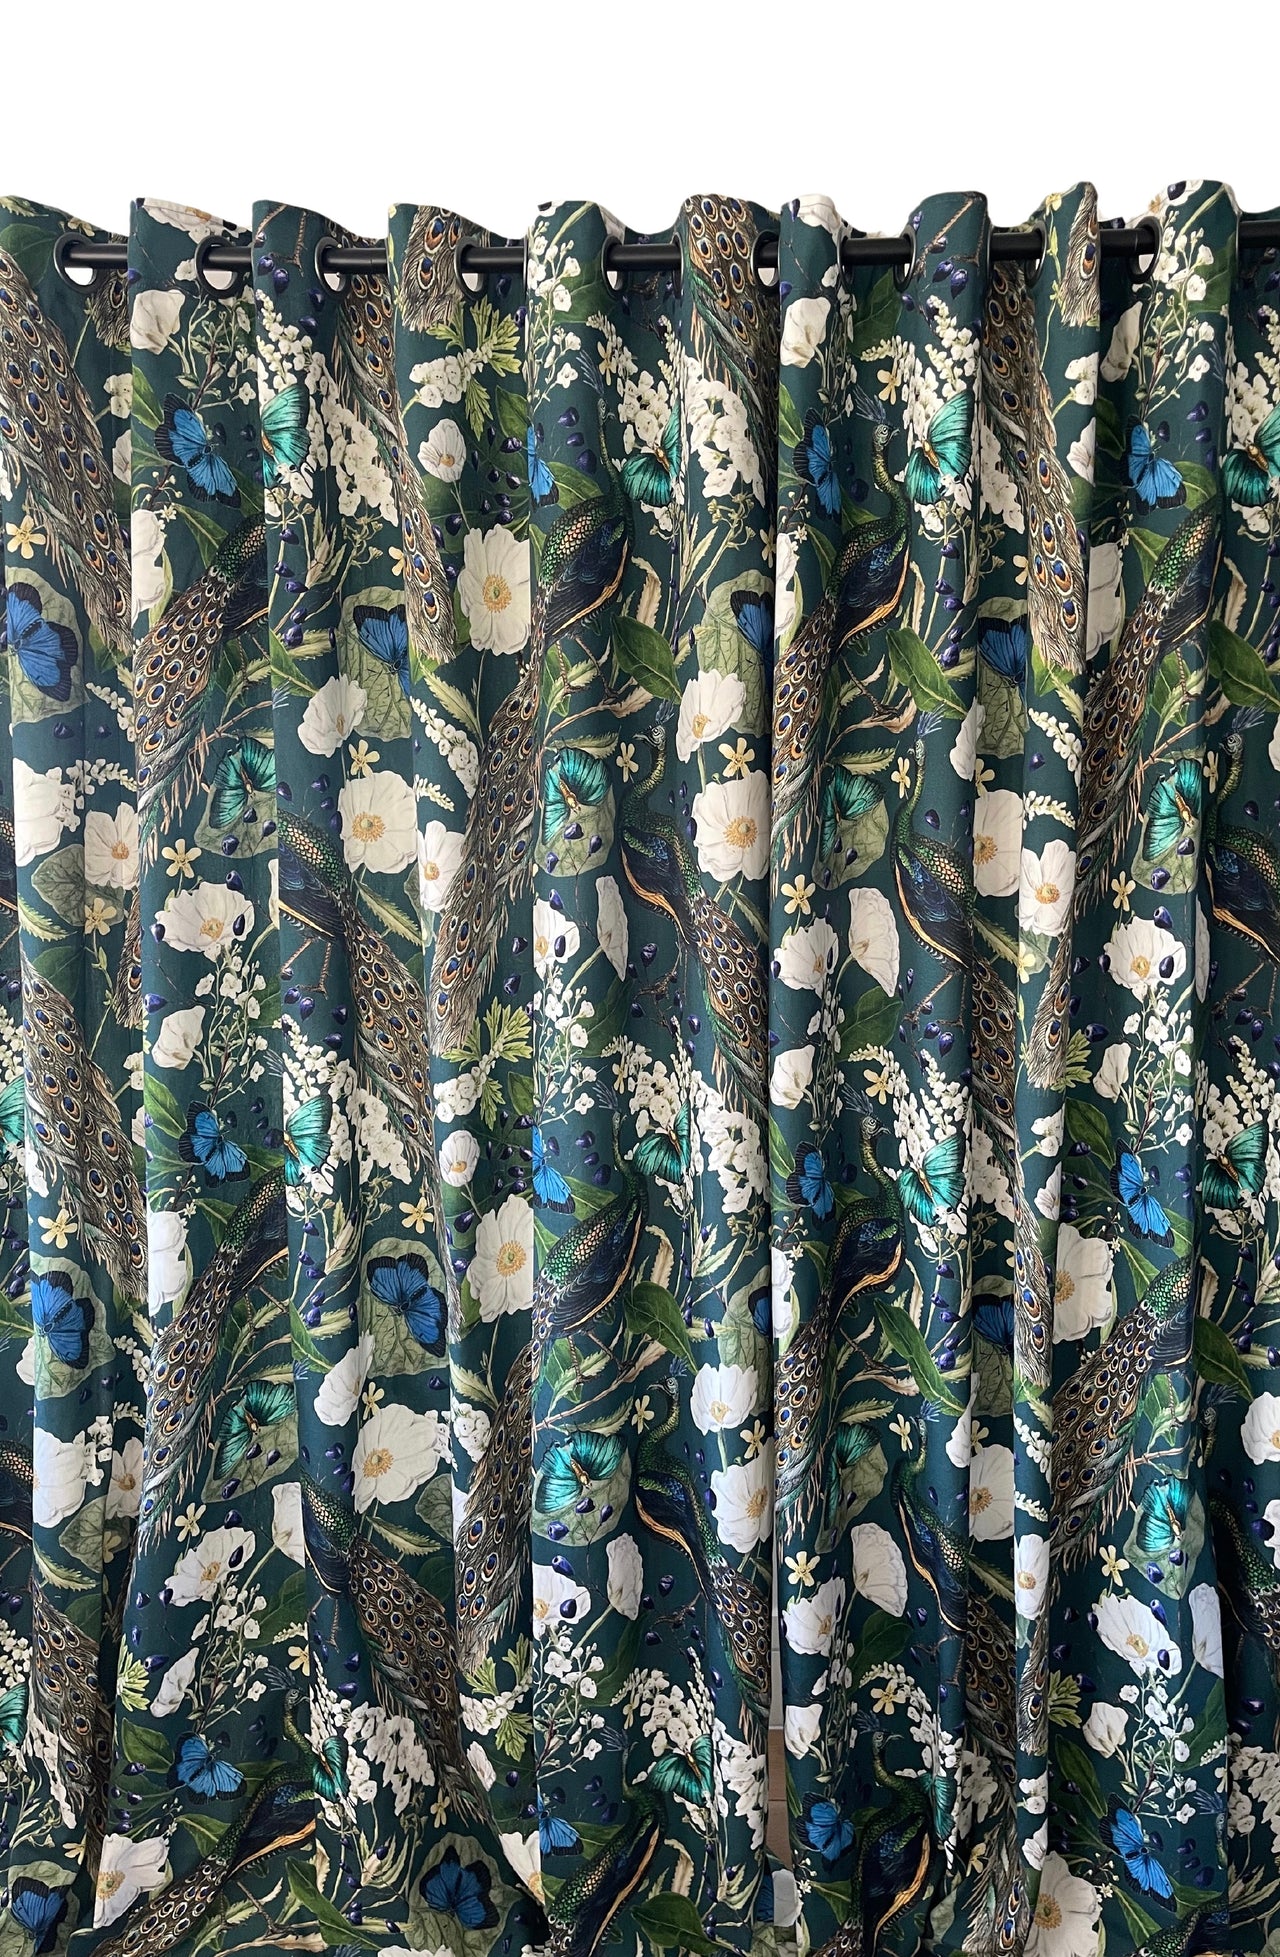 Teal Peacock Pair of Curtains - Pencil Pleat or Eyelet - Custom Made Drapes / Home Decor - Nature-Inspired Window Treatments